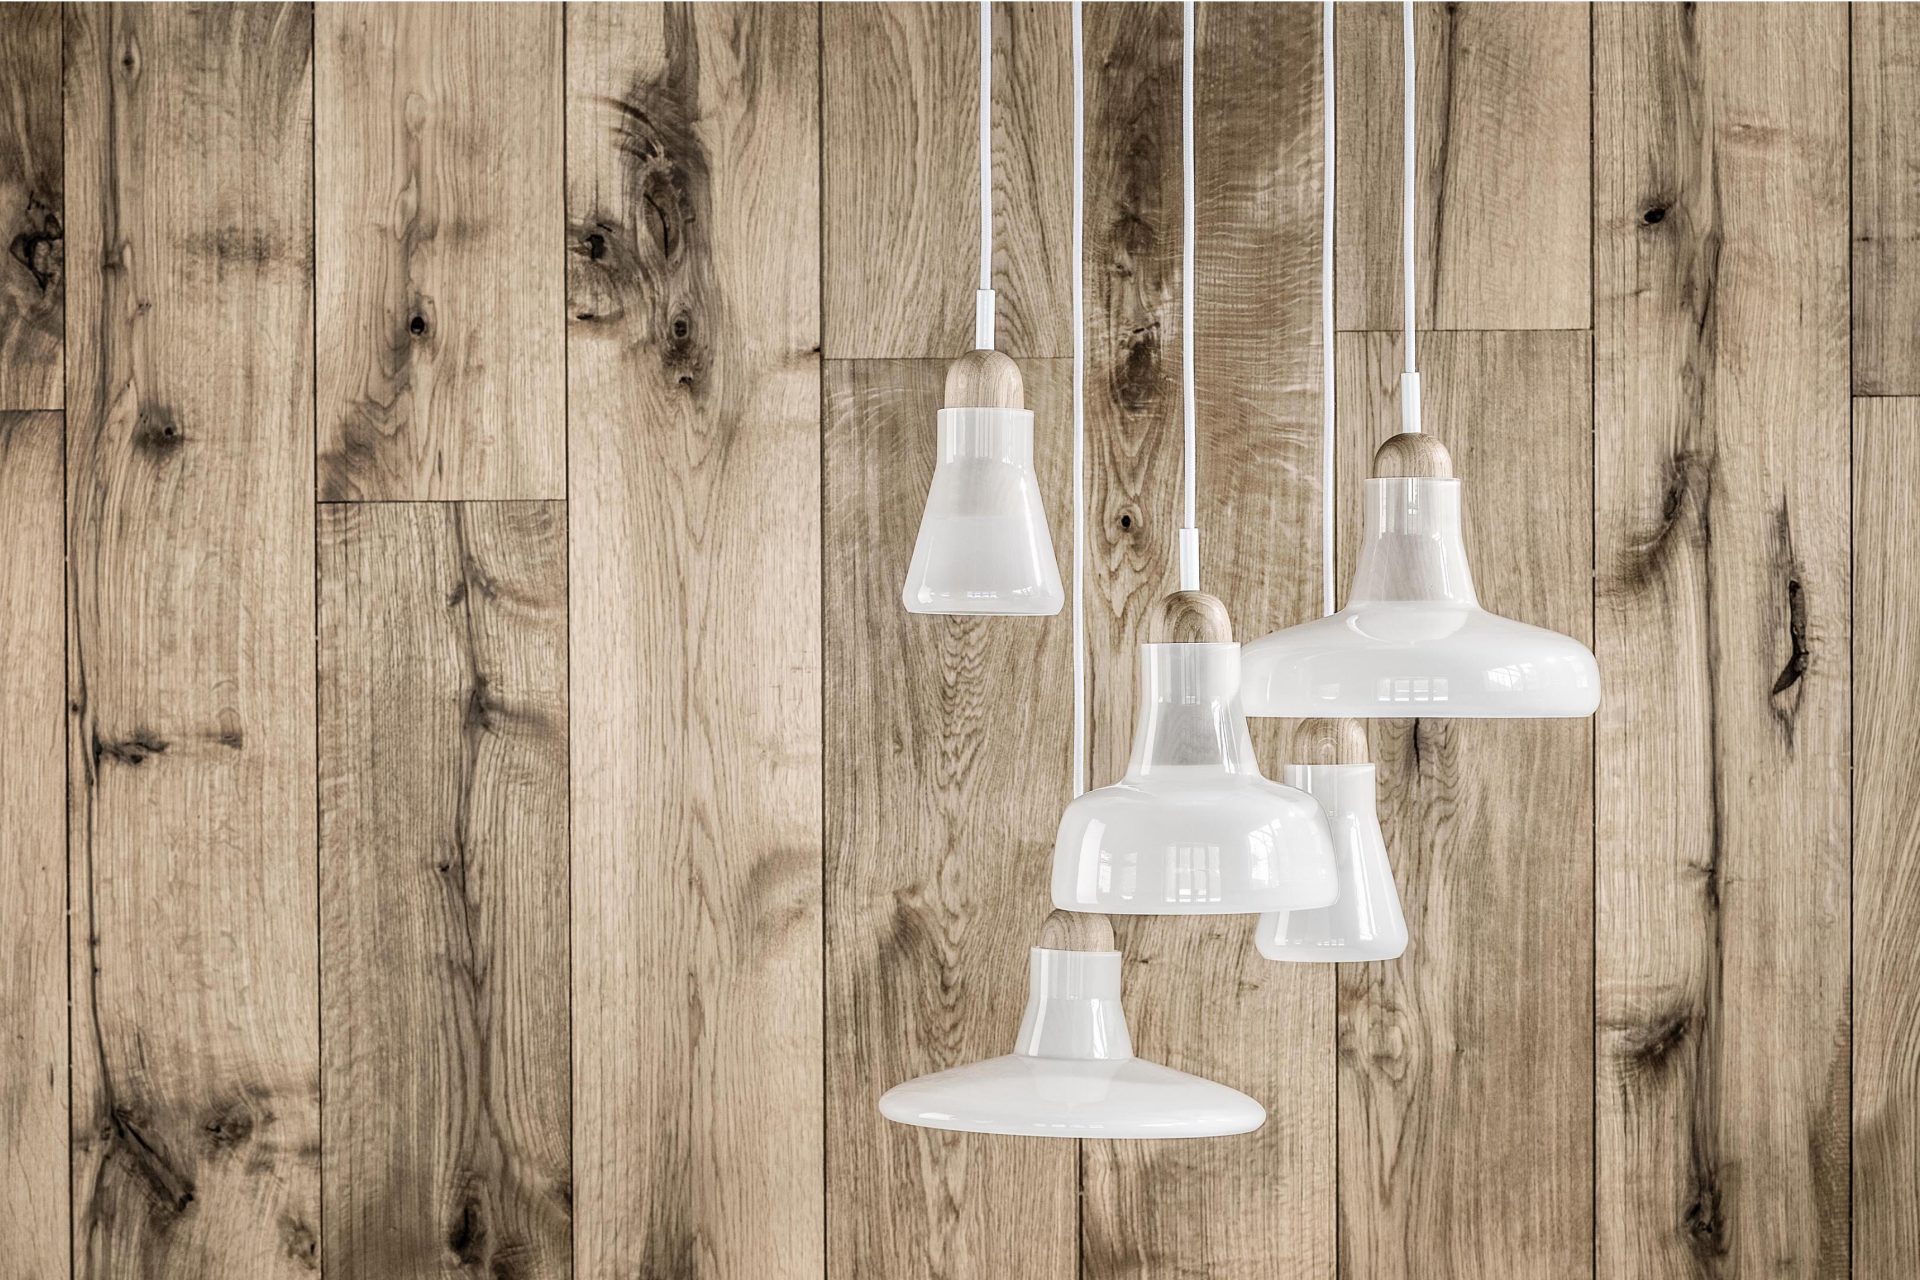 Luminaire comprised of five white glass pendant lamps